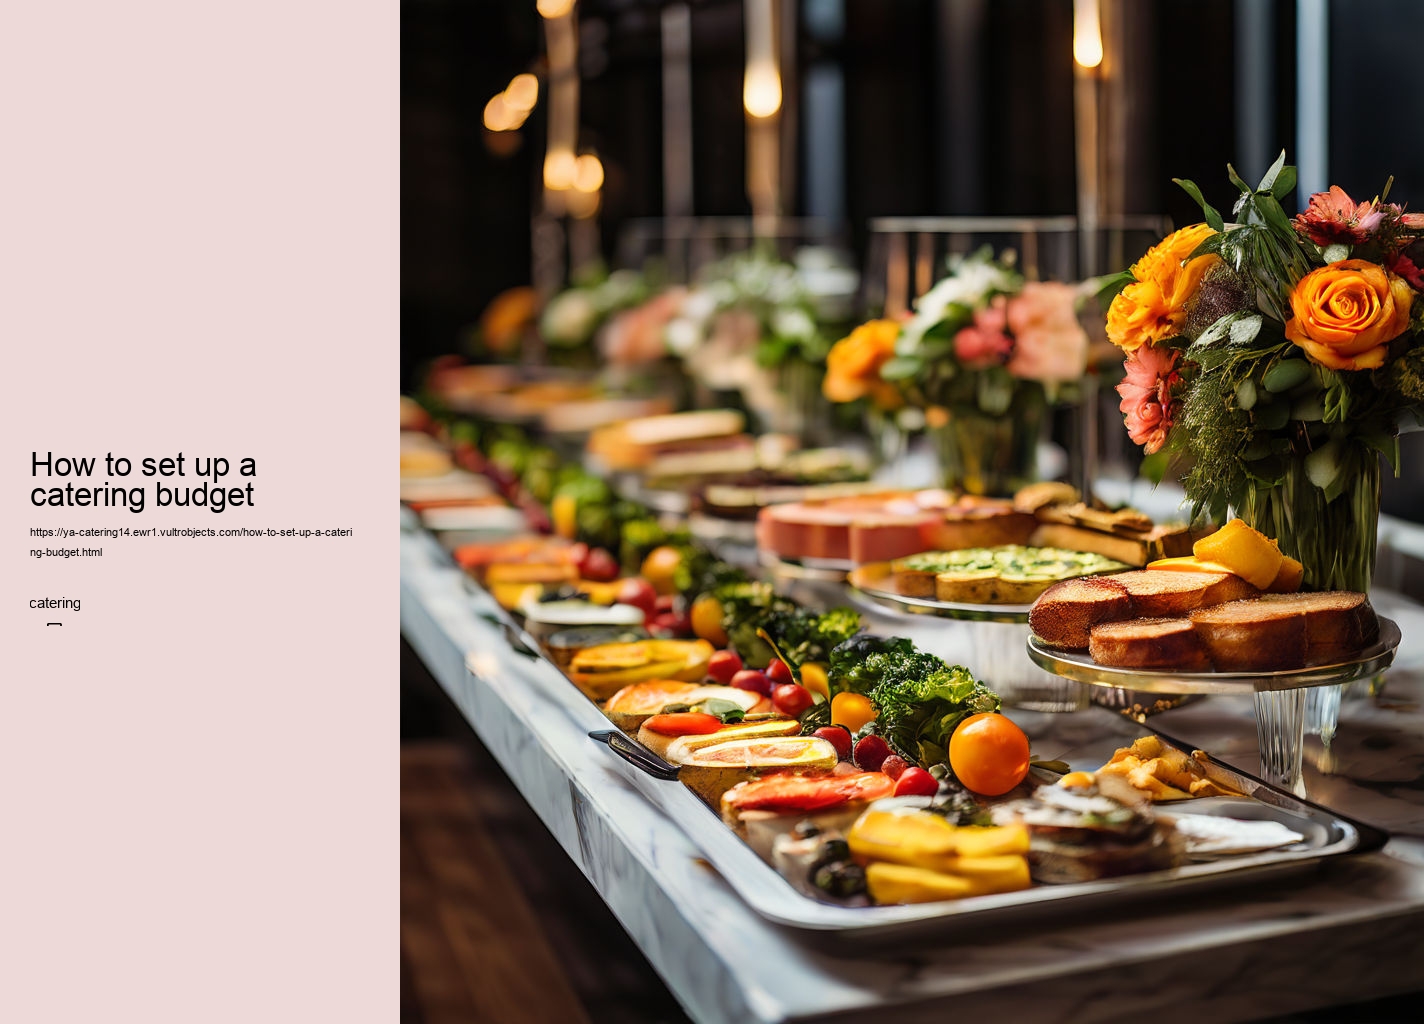 How to set up a catering budget